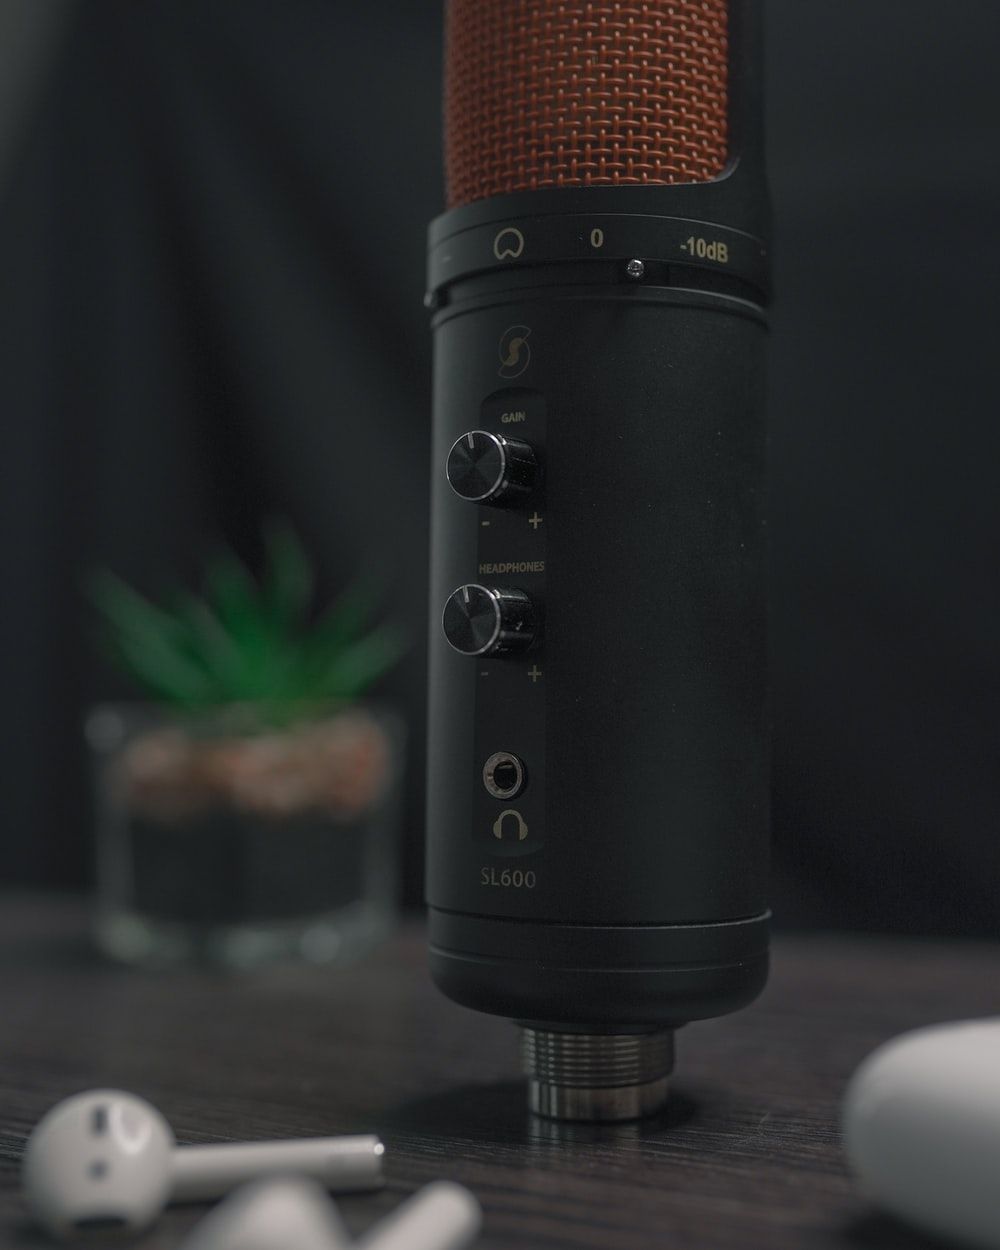 Condenser Microphone Picture. Download Free Image